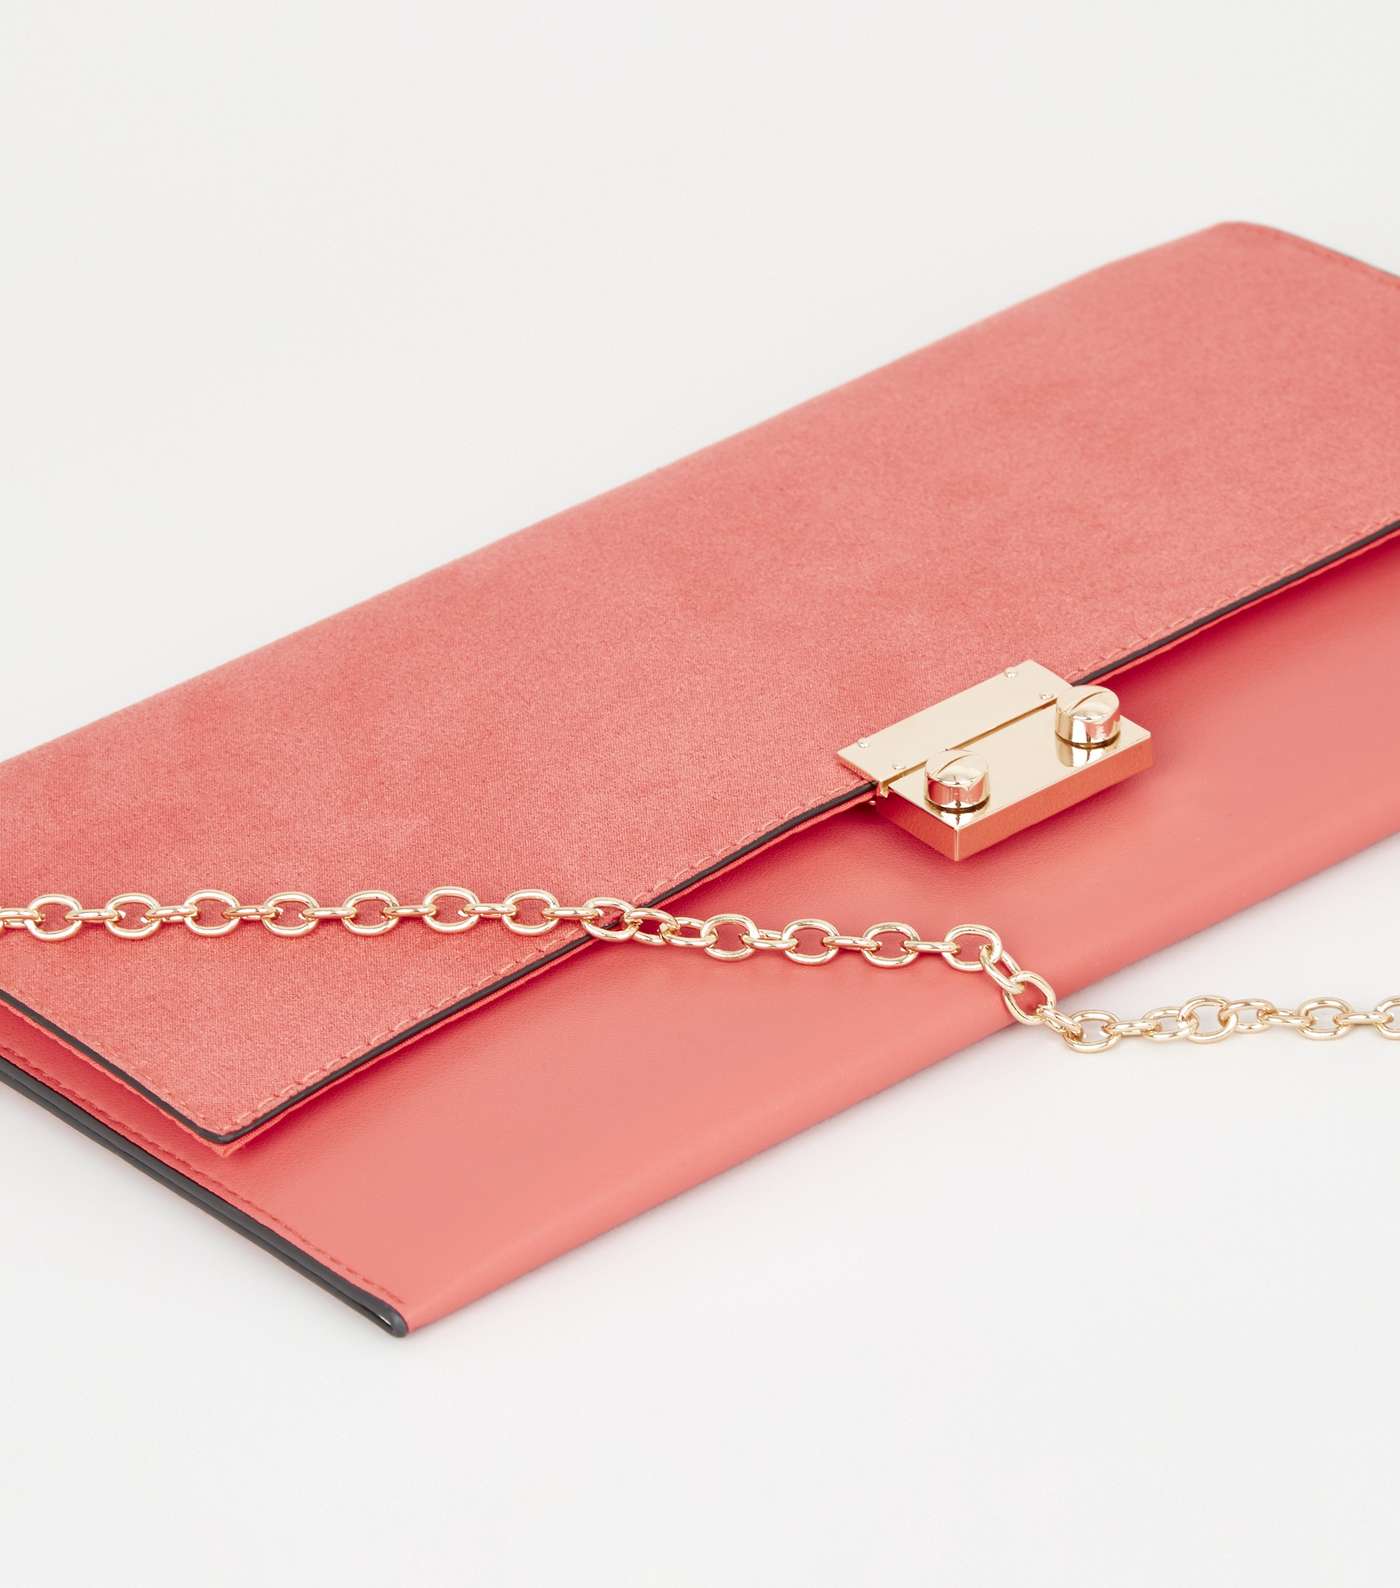 Coral Leather-Look Suedette Clutch Bag Image 3